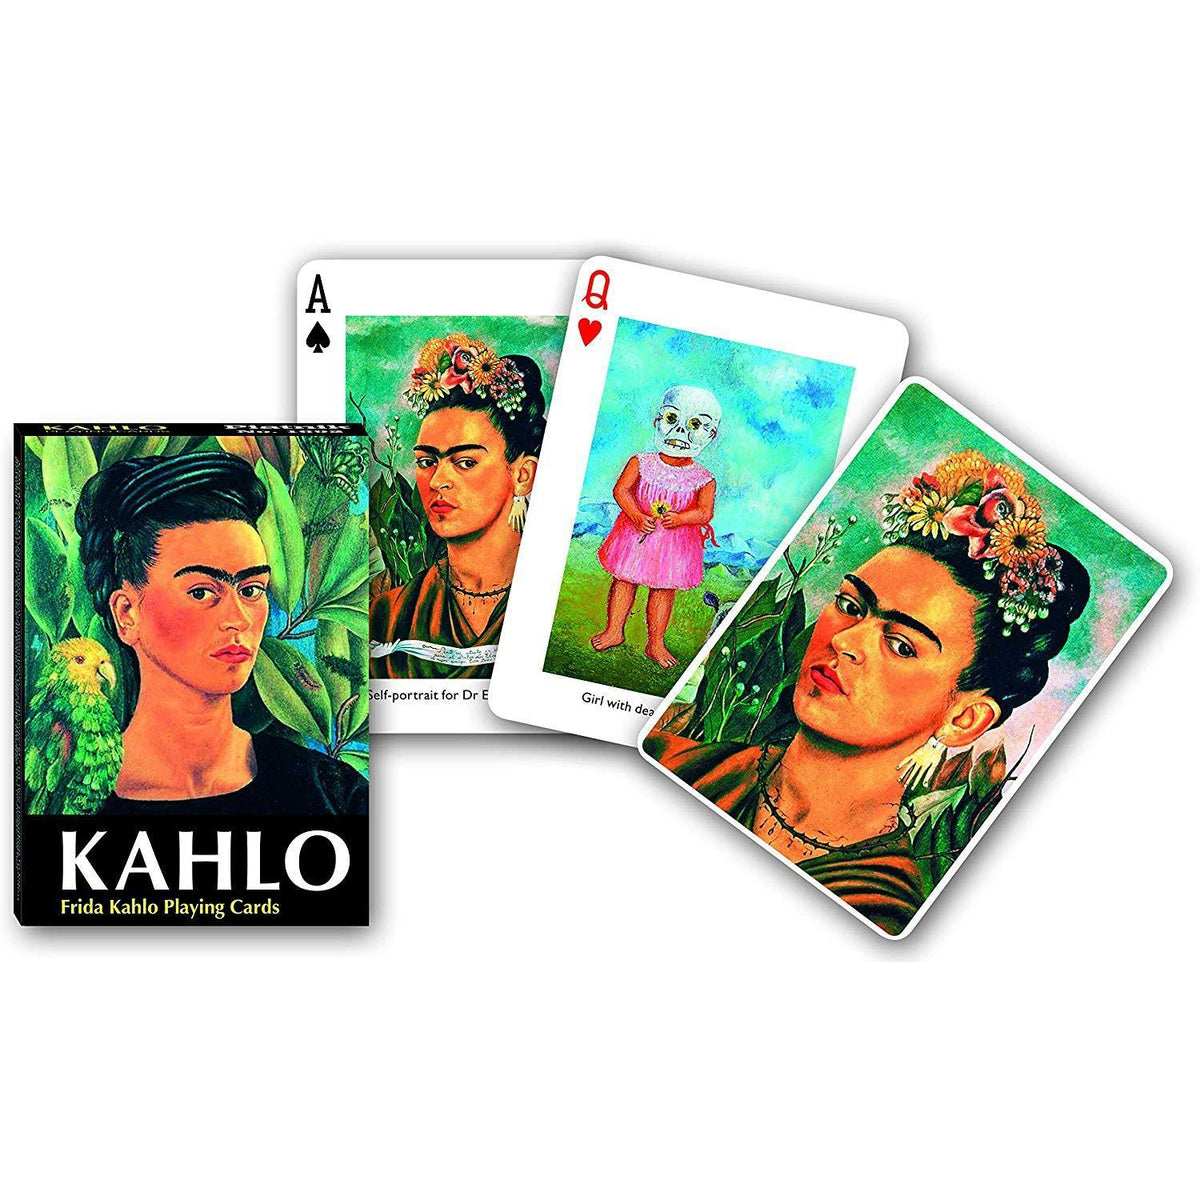 The Frida Kahlo Playing Cards displayed with box.